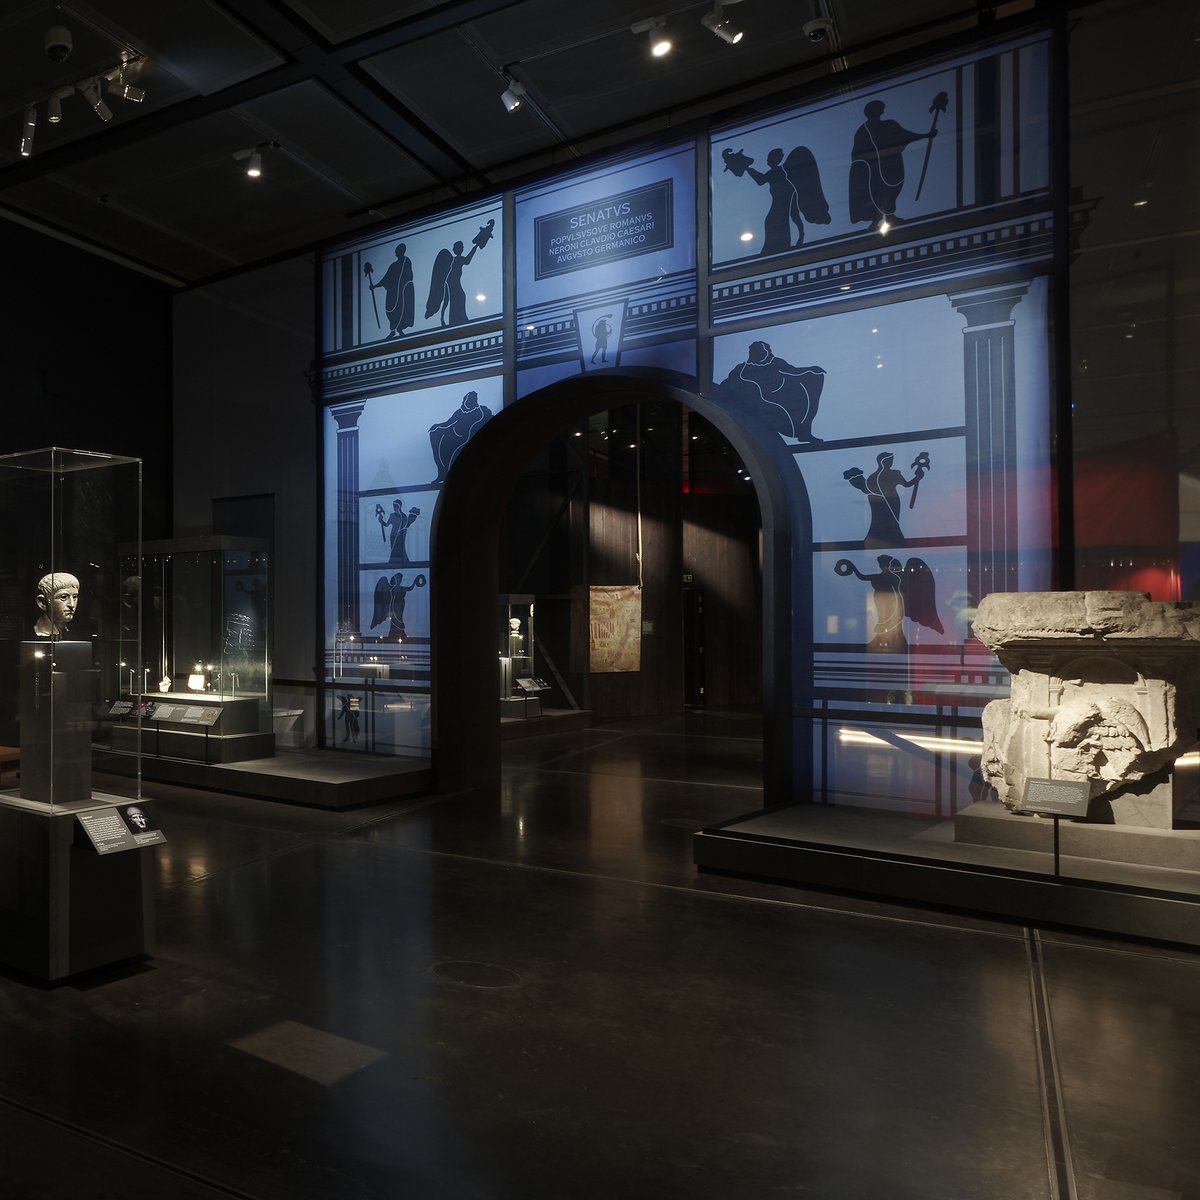 Inside the exhibition - a large blue triumphal arch divides the space, and there is an architectural fragment on the right and a bronze bust of Nero on the right. 